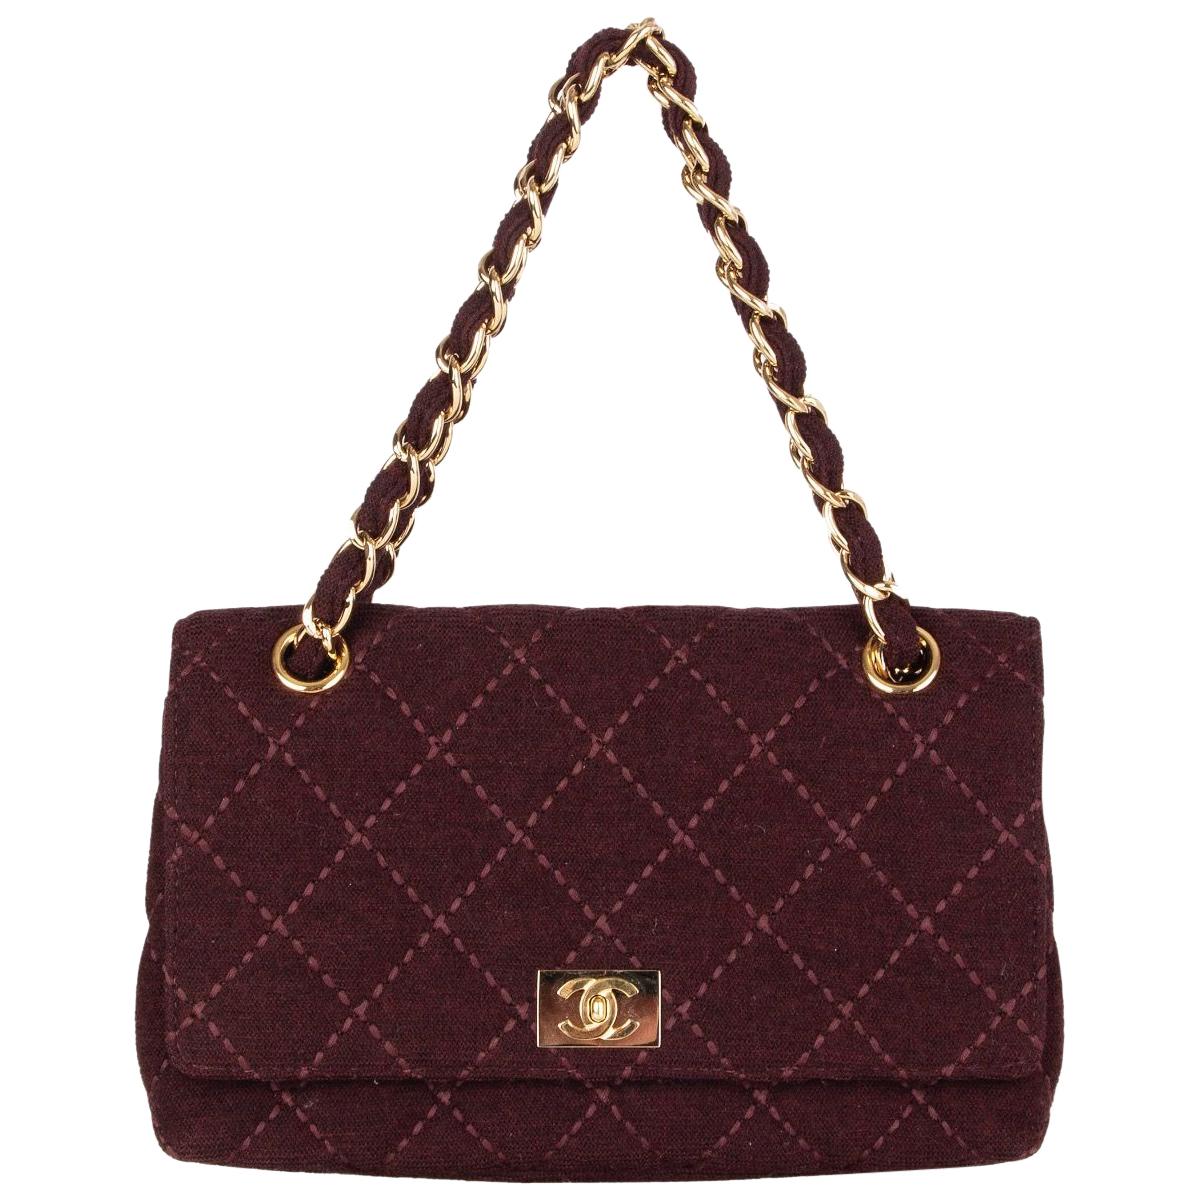 CHANEL burgundy quilted wool JERSEY CLASSIC FLAP Shoulder Bag